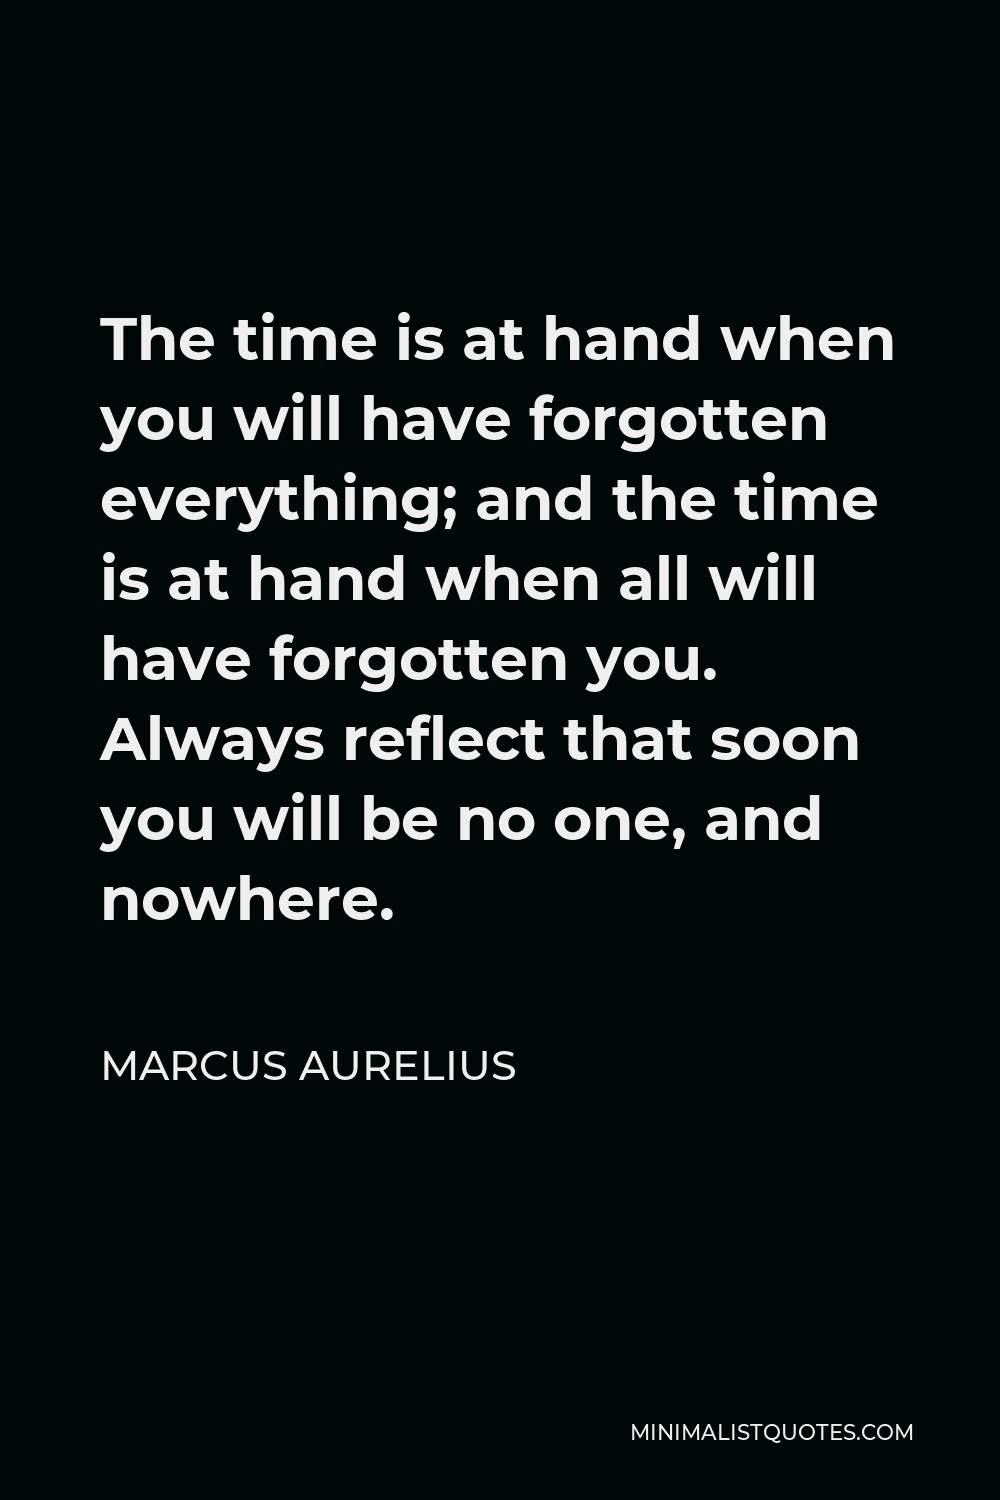 Marcus Aurelius Quote - The time is at hand when you will have forgotten everything; and the time is at hand when all will have forgotten you. Always reflect that soon you will be no one, and nowhere.